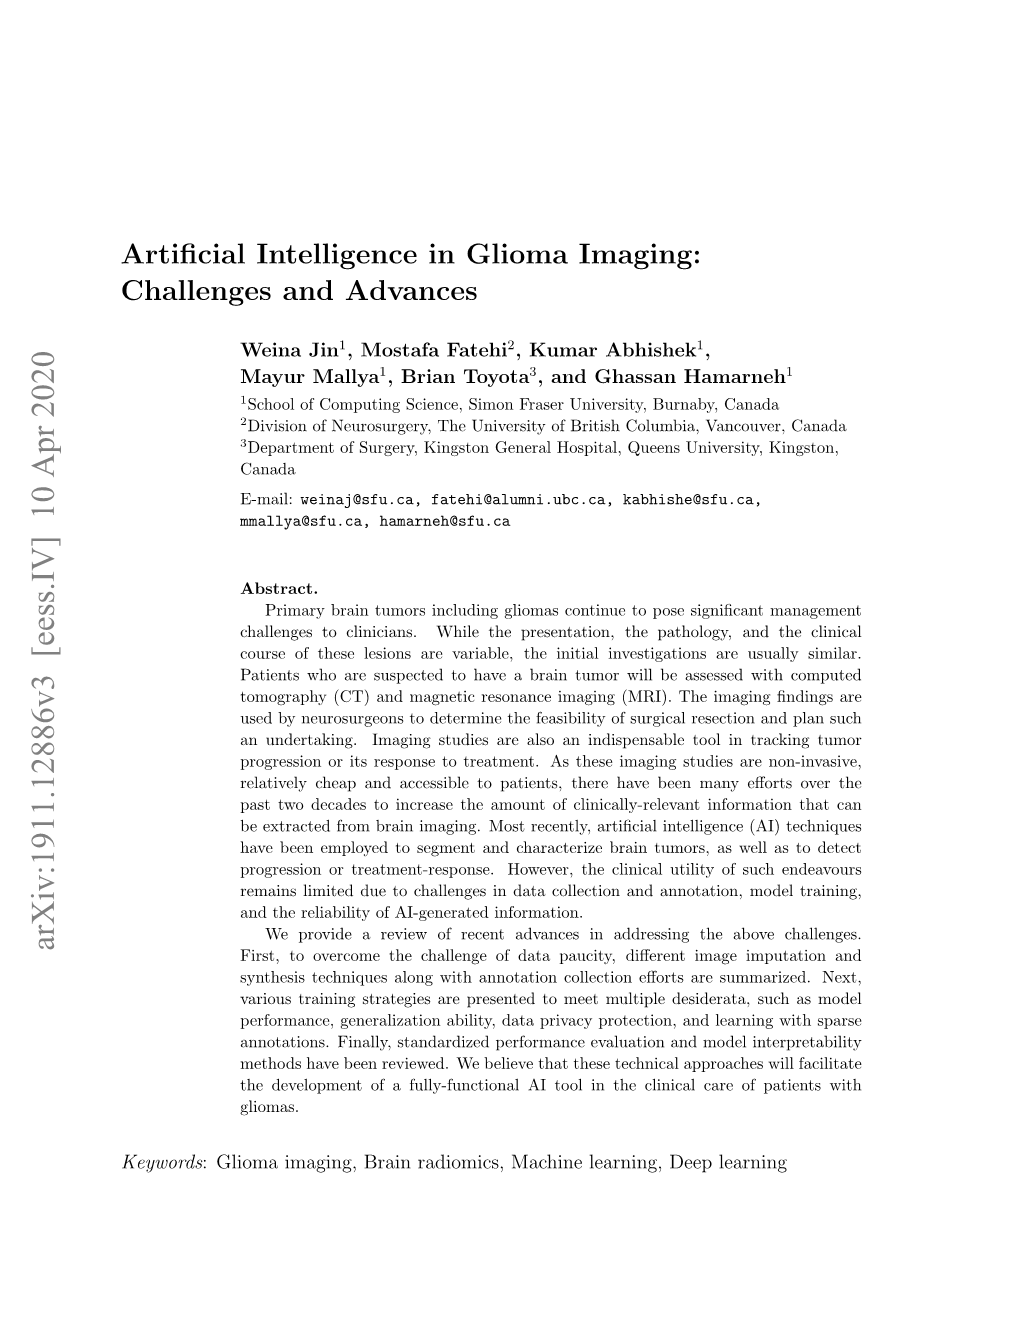 Artificial Intelligence in Glioma Imaging: Challenges and Advances